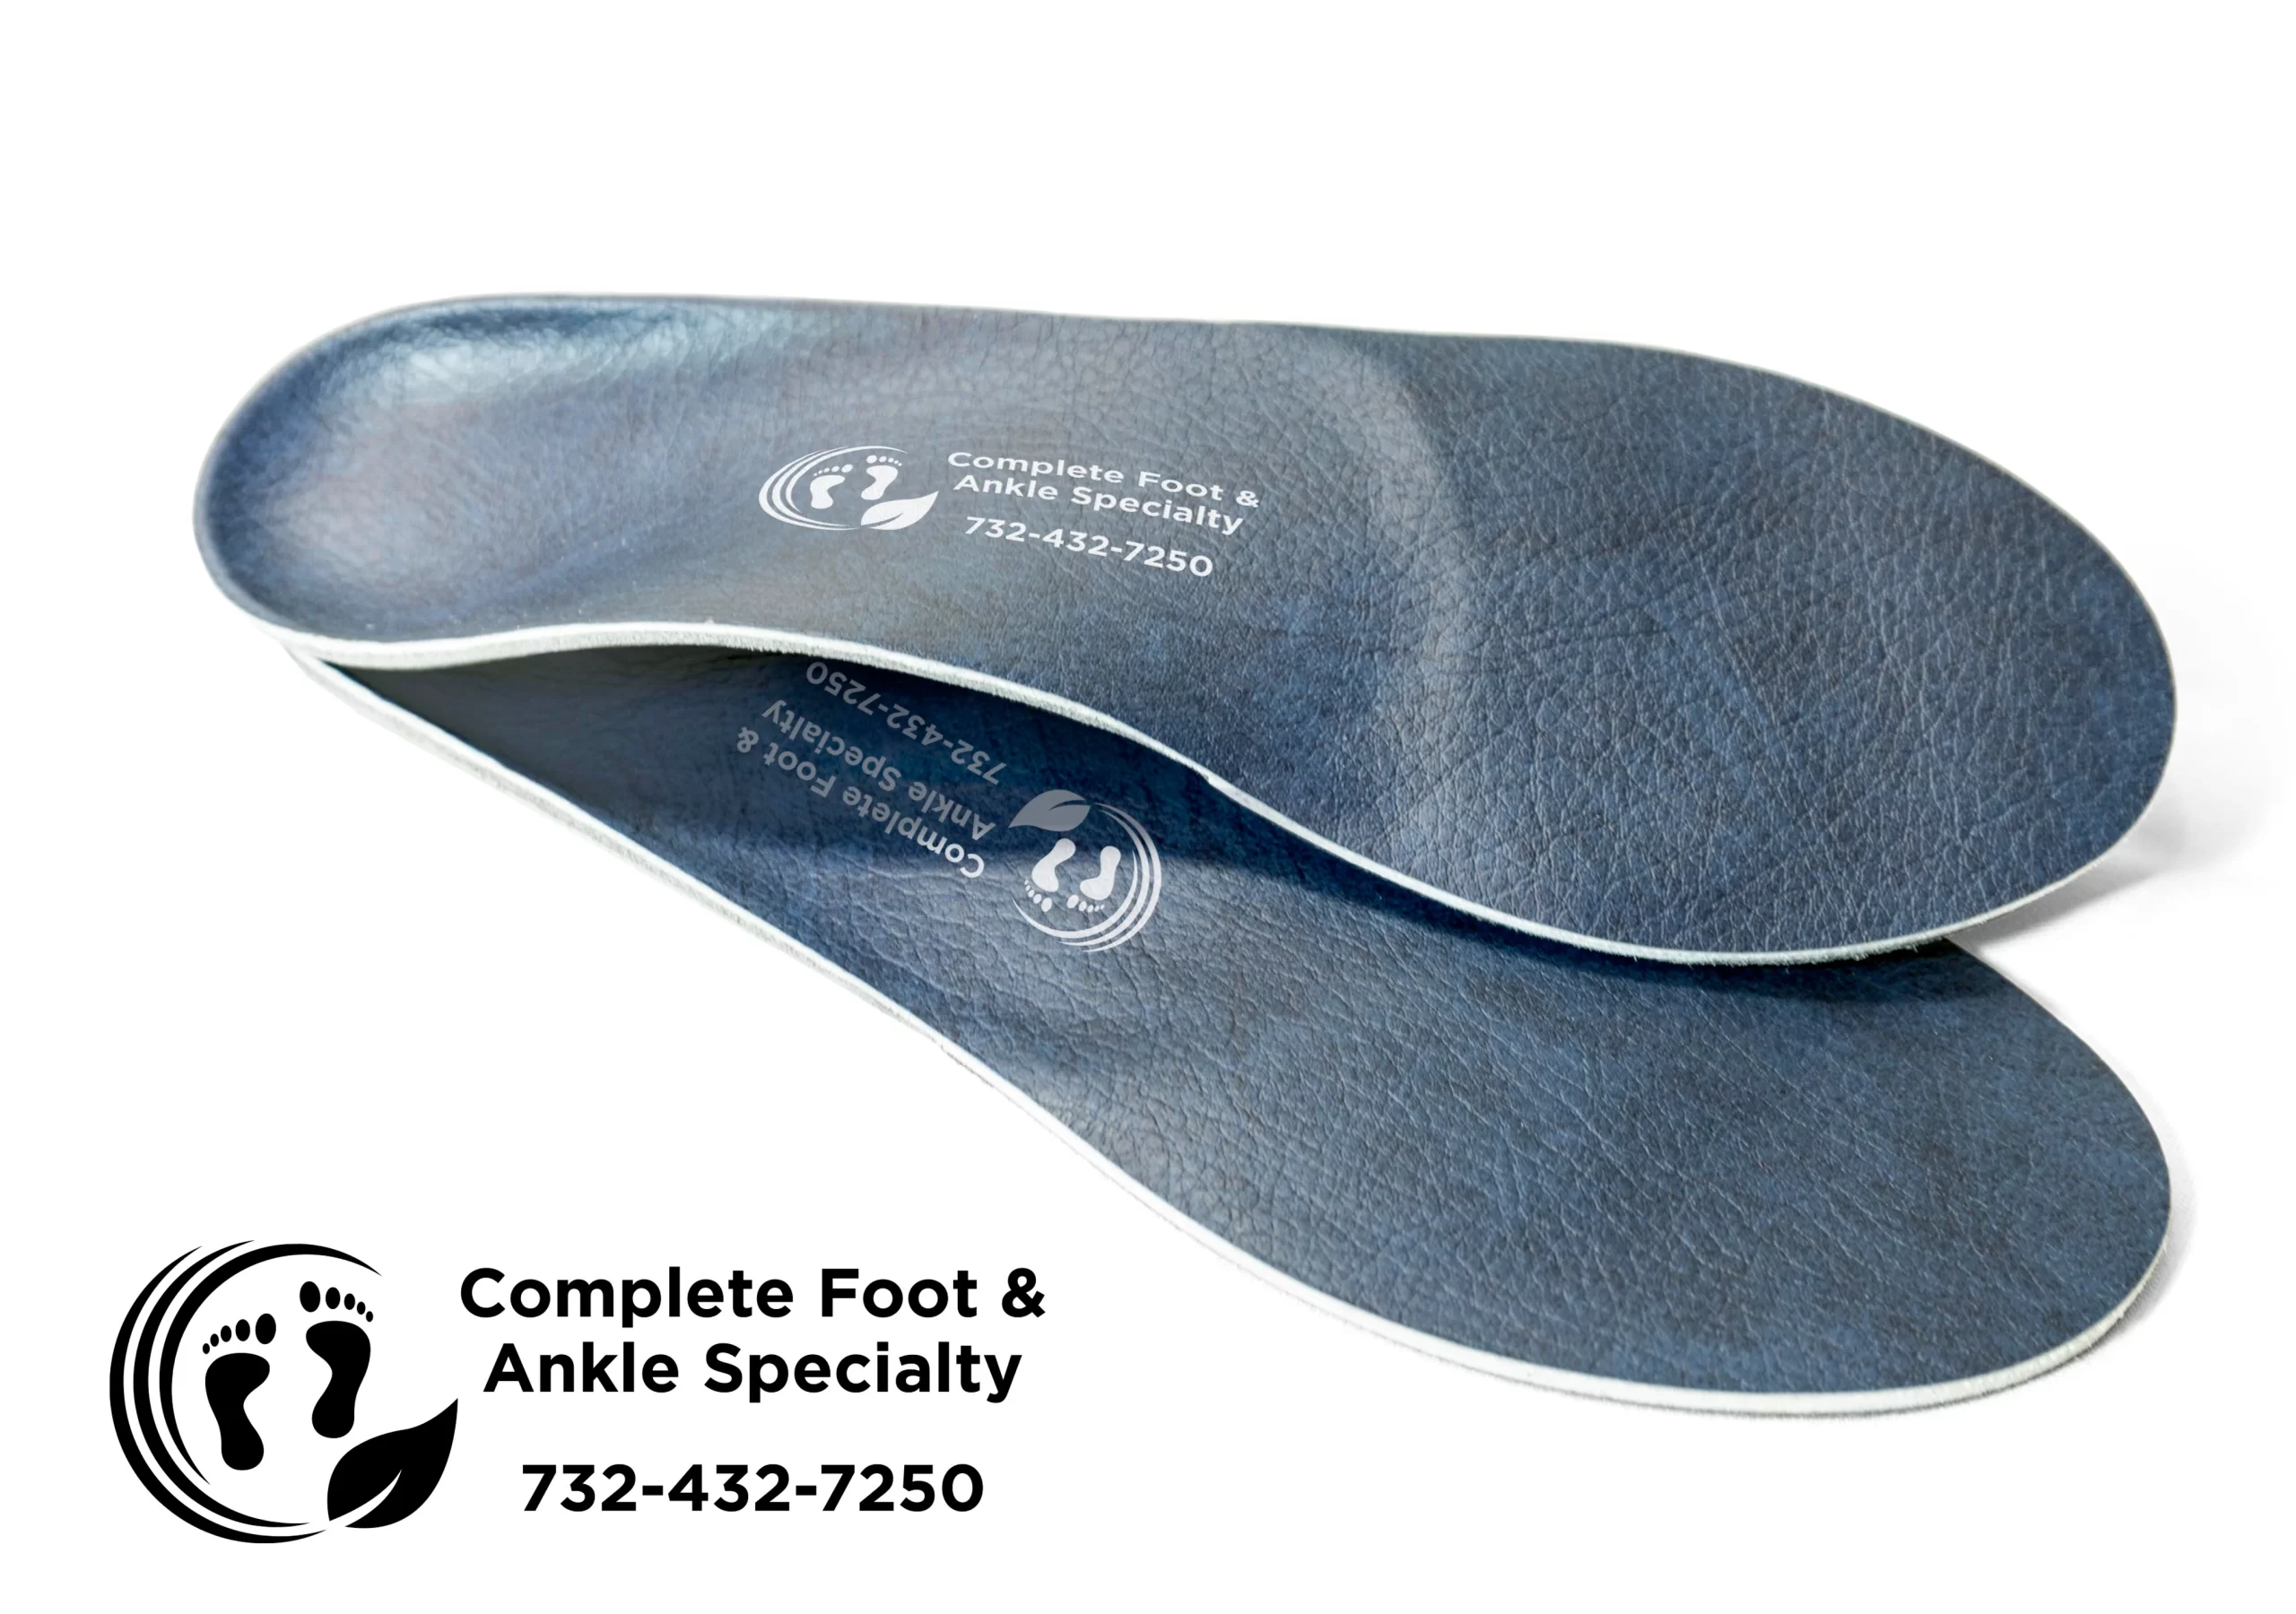 Custom Orthotics by Complete Foot & Ankle Specialty